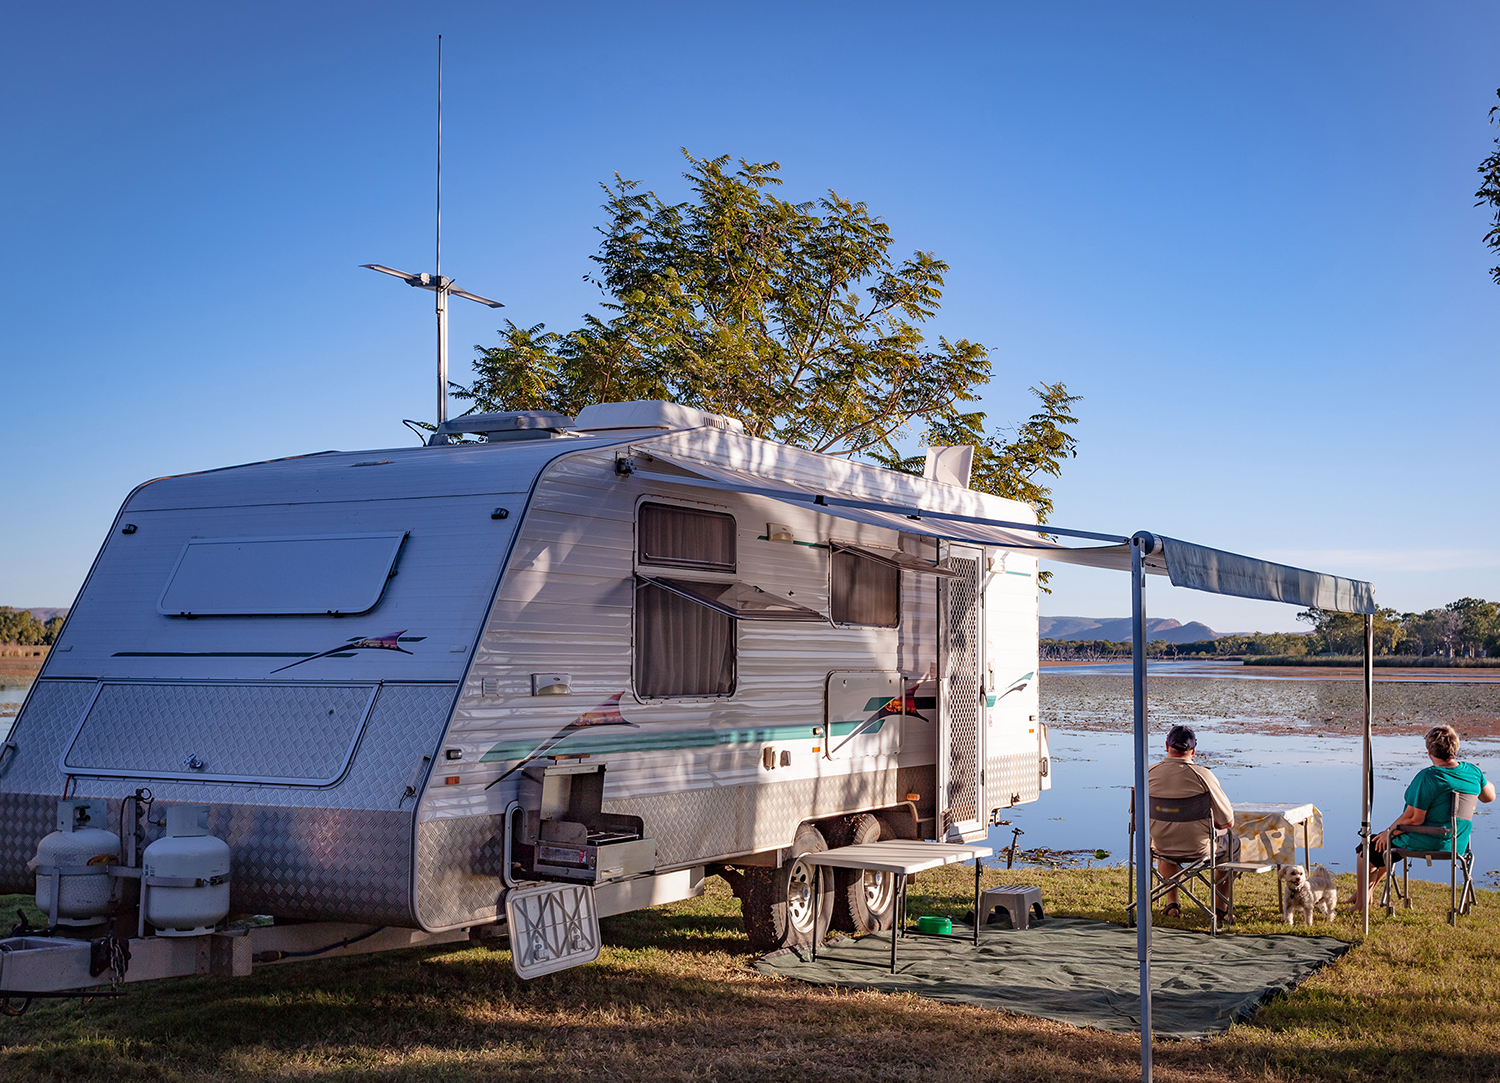 Don't forget the Tires when you're checking your Caravan! - Continental AG